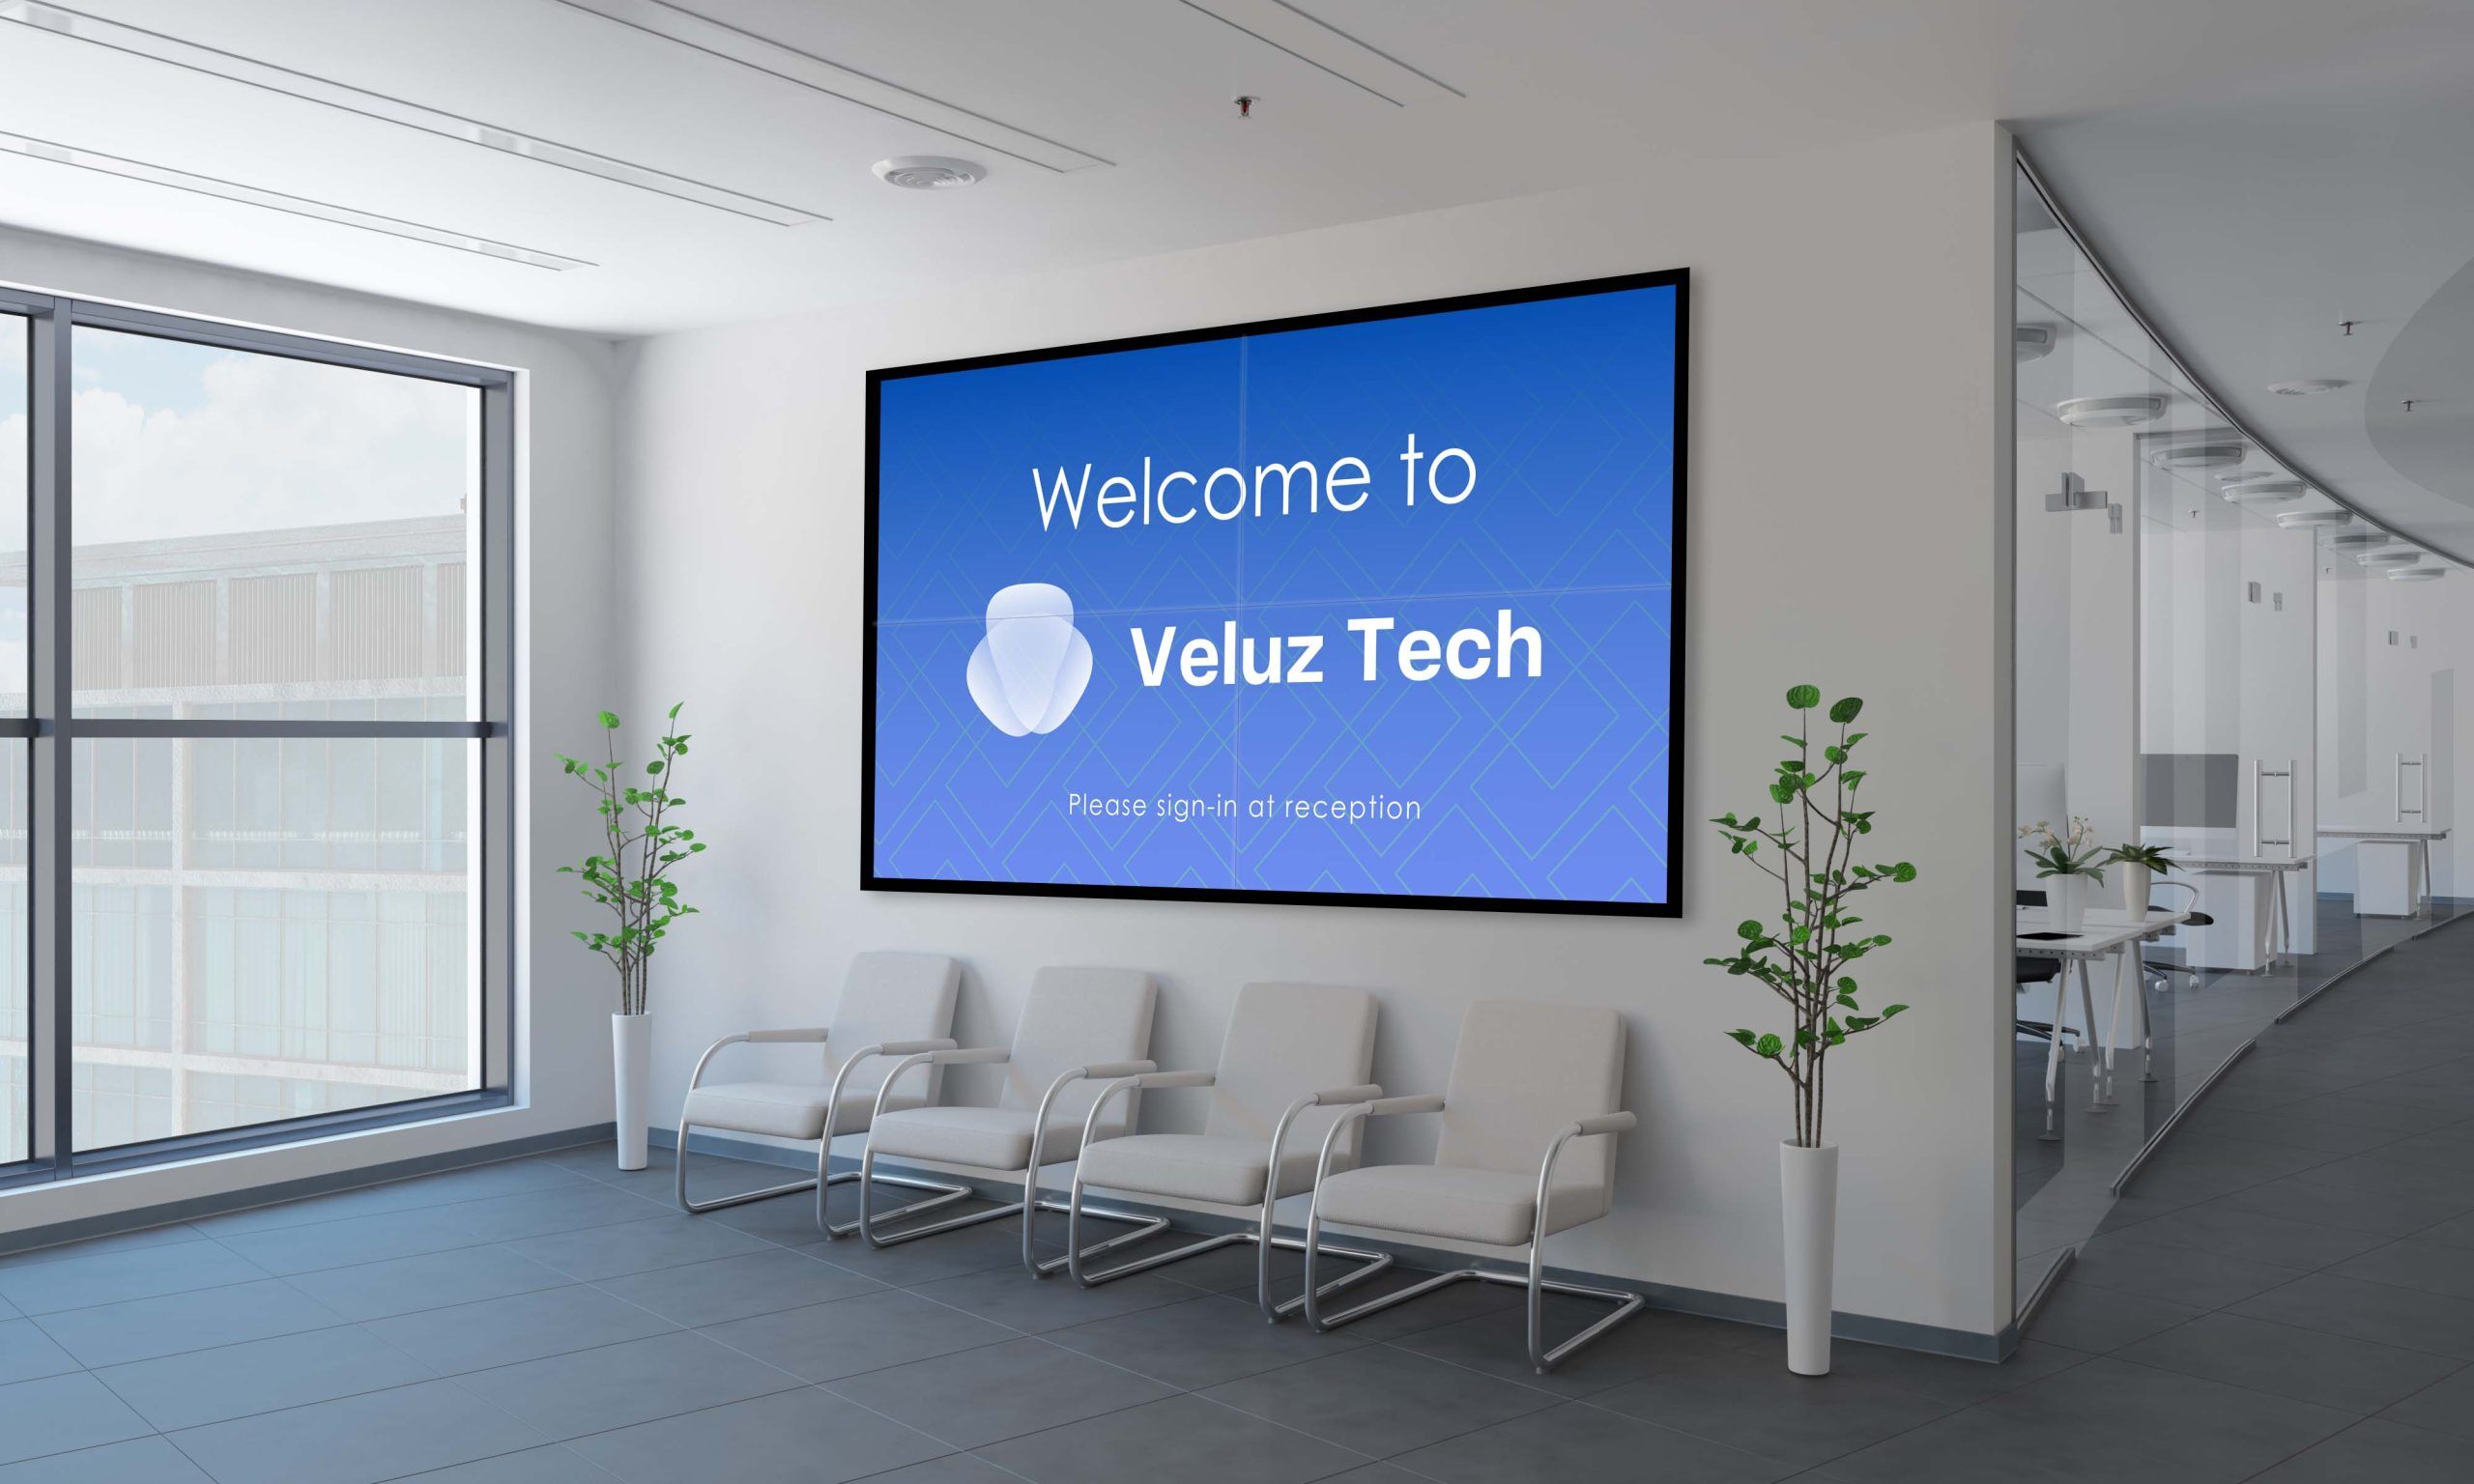 LamasaTech seamless video wall with welcome message at an office reception area